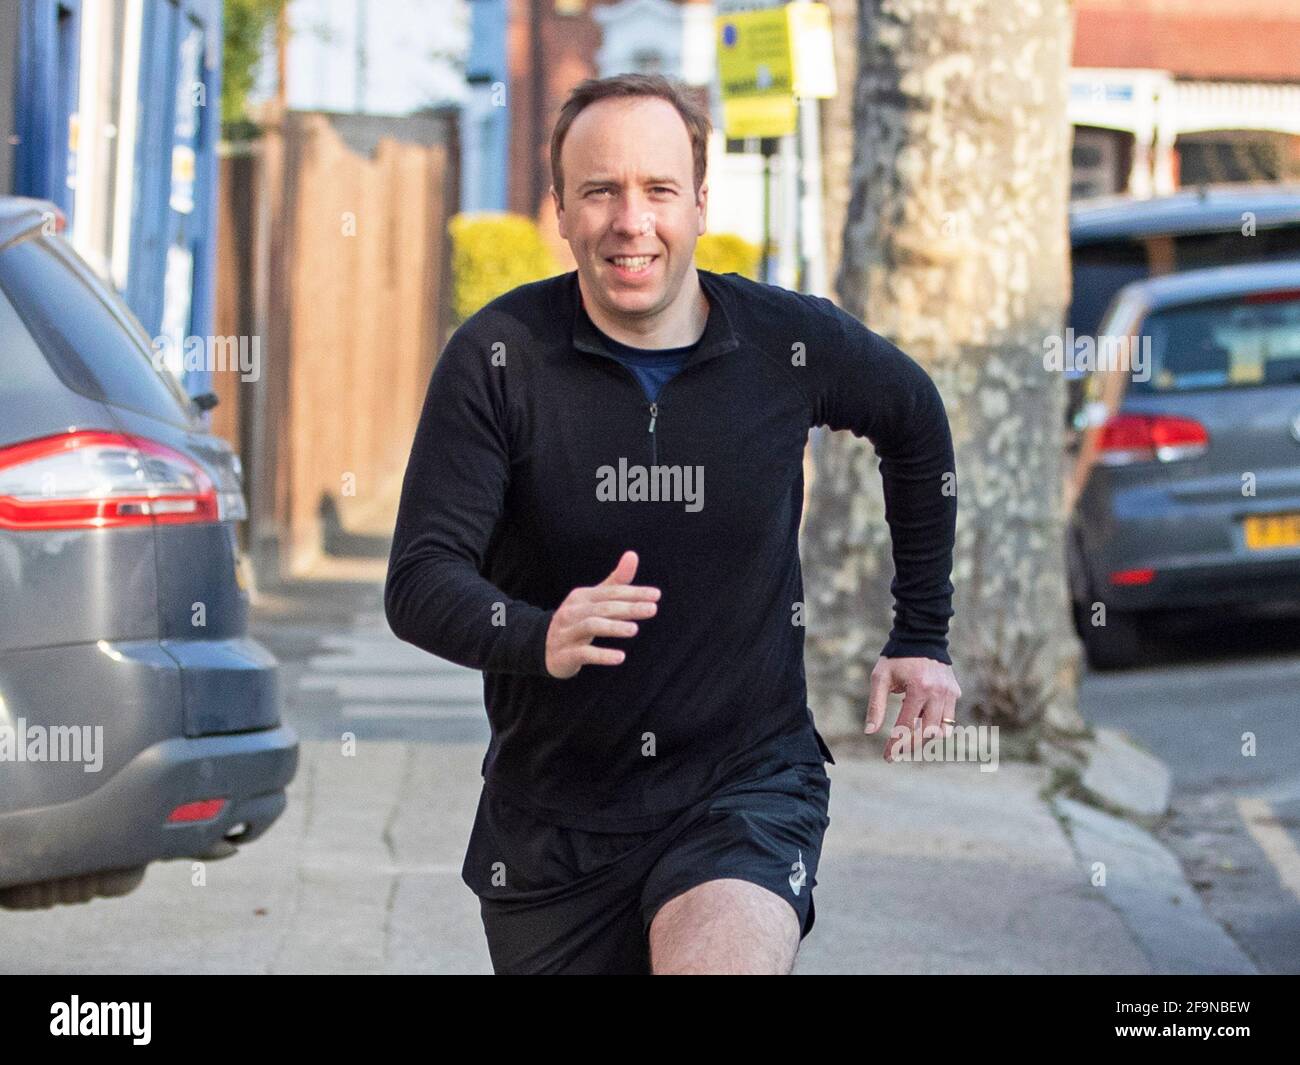 Health Secretary Matt Hancock sets off on a jog this morning near his West London home on the 20th of April 2020 as he revealed yesterday that India h Stock Photo